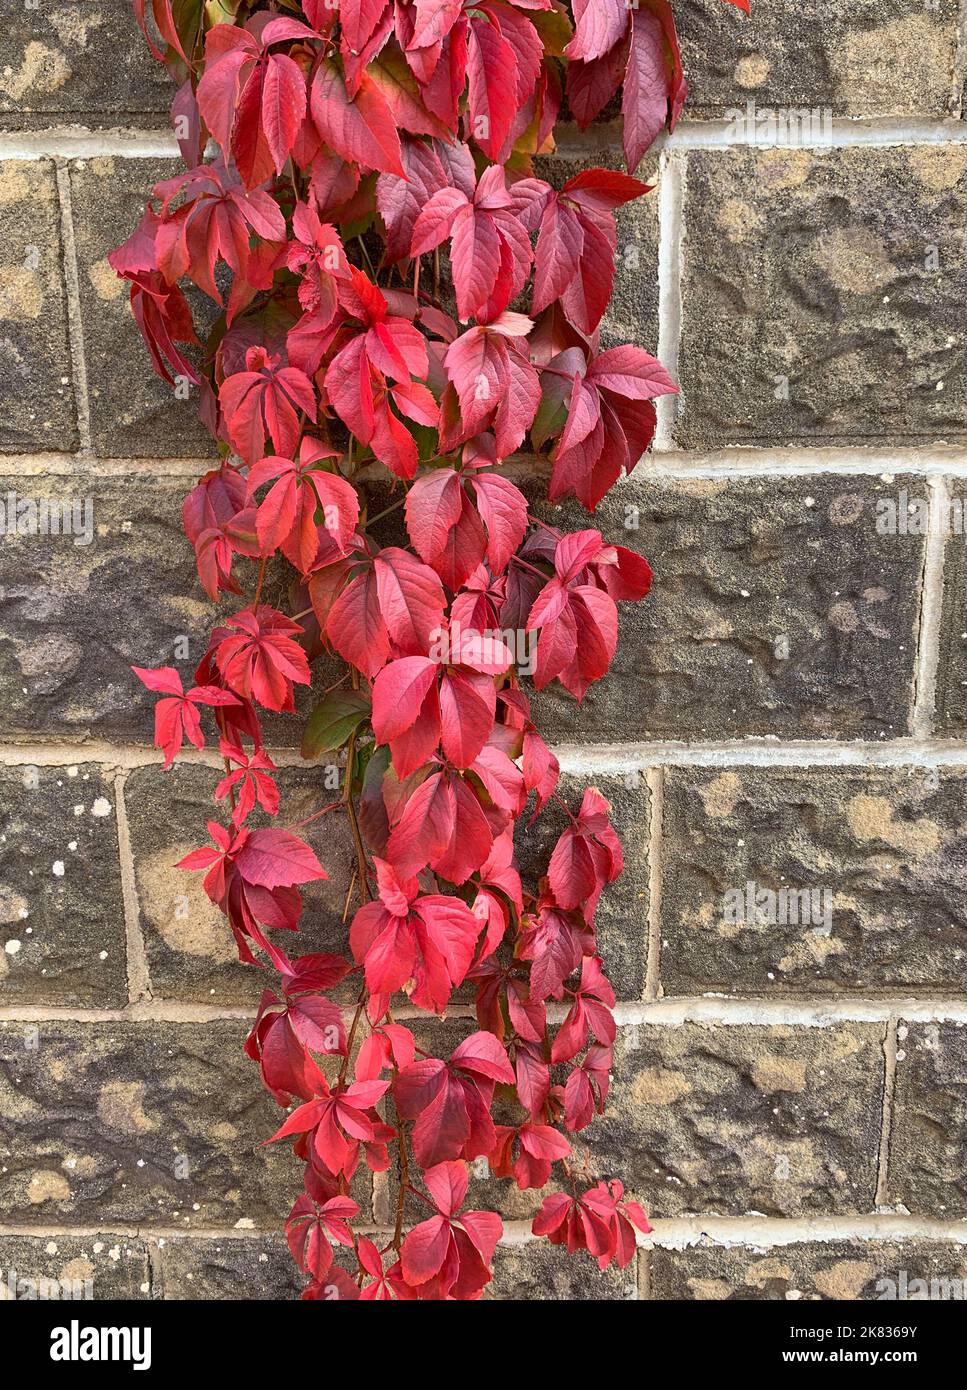 Close up of the red autumn leaves of the climbing garden plant Virginia Creeper or Parthenocissus quinquefolia seen hanging from a wall. Stock Photo